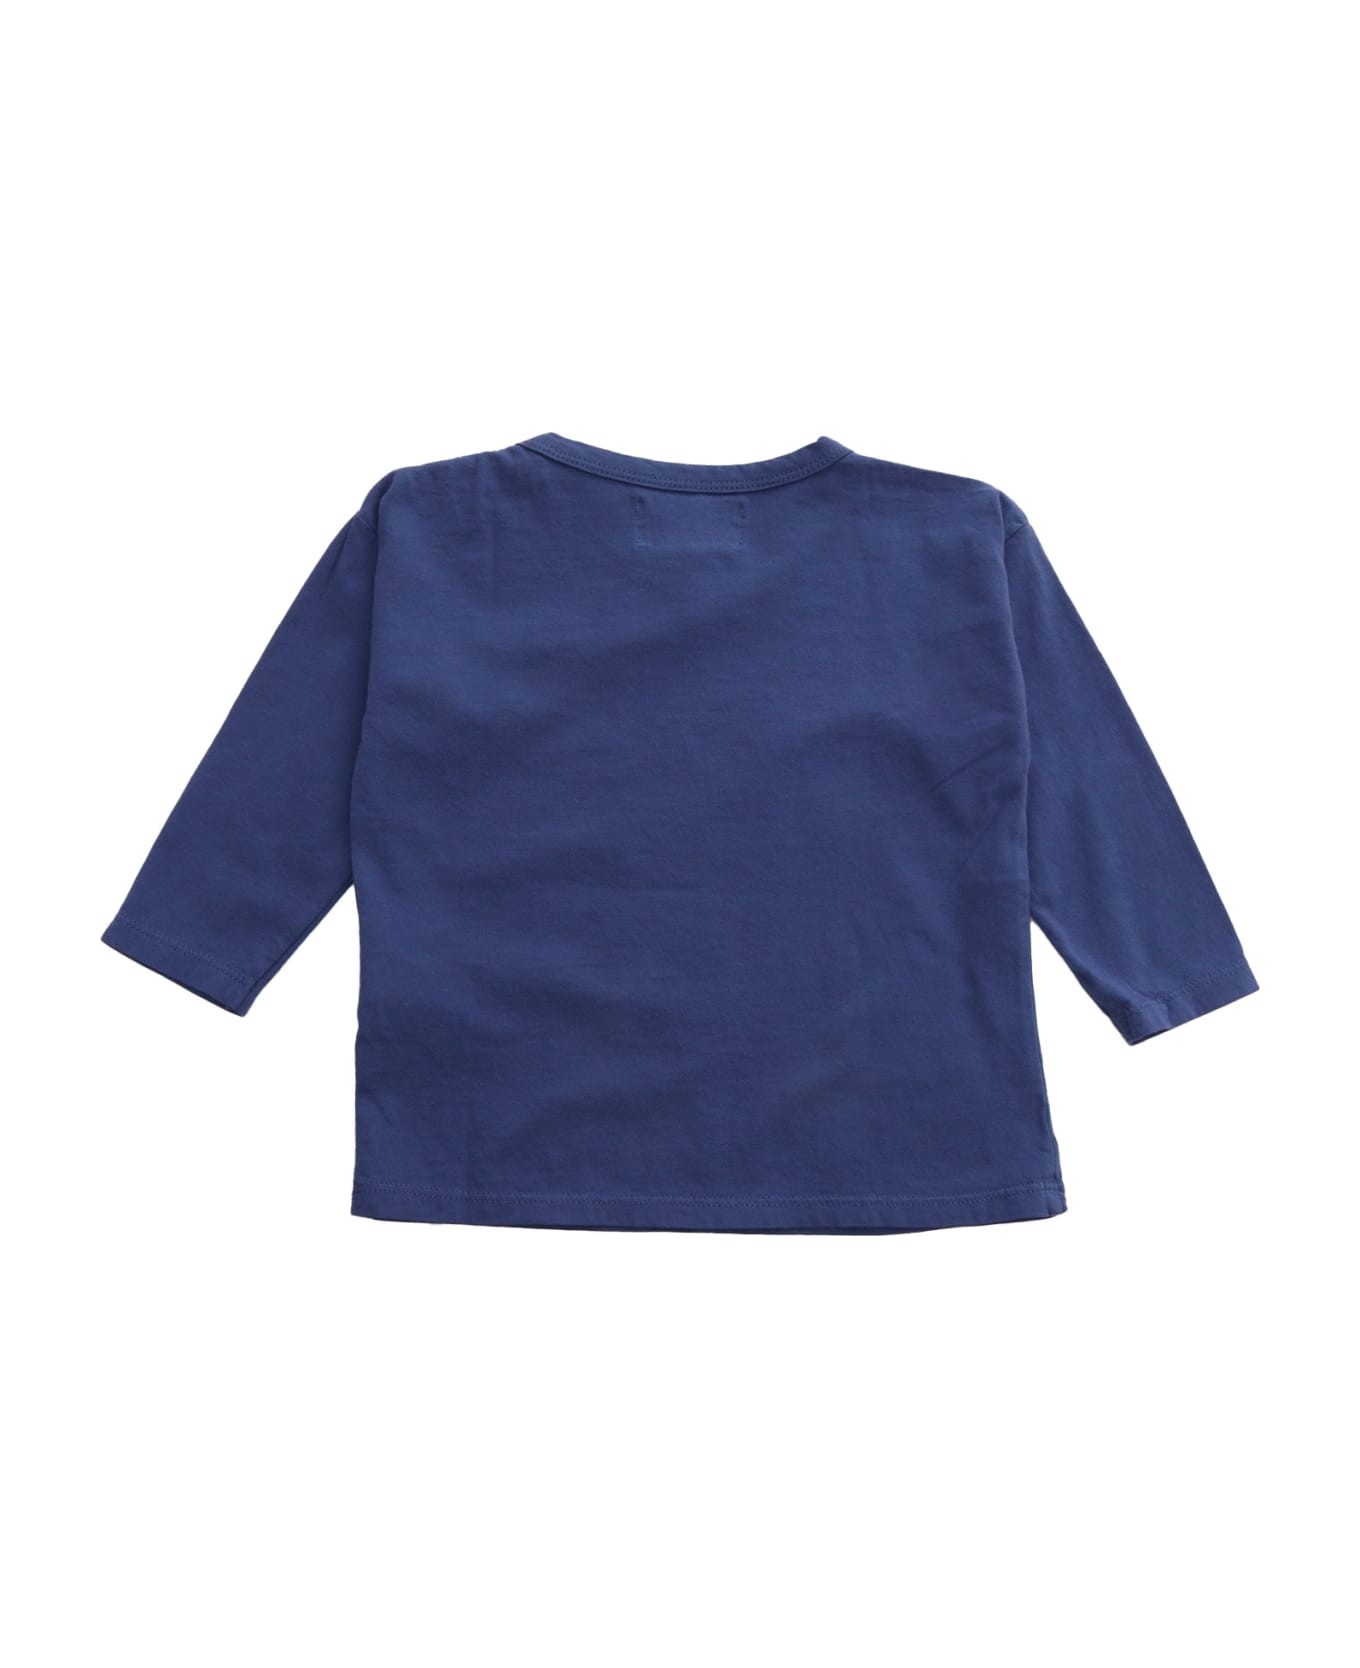 Bobo Choses Blue Sweater With Print - BLUE